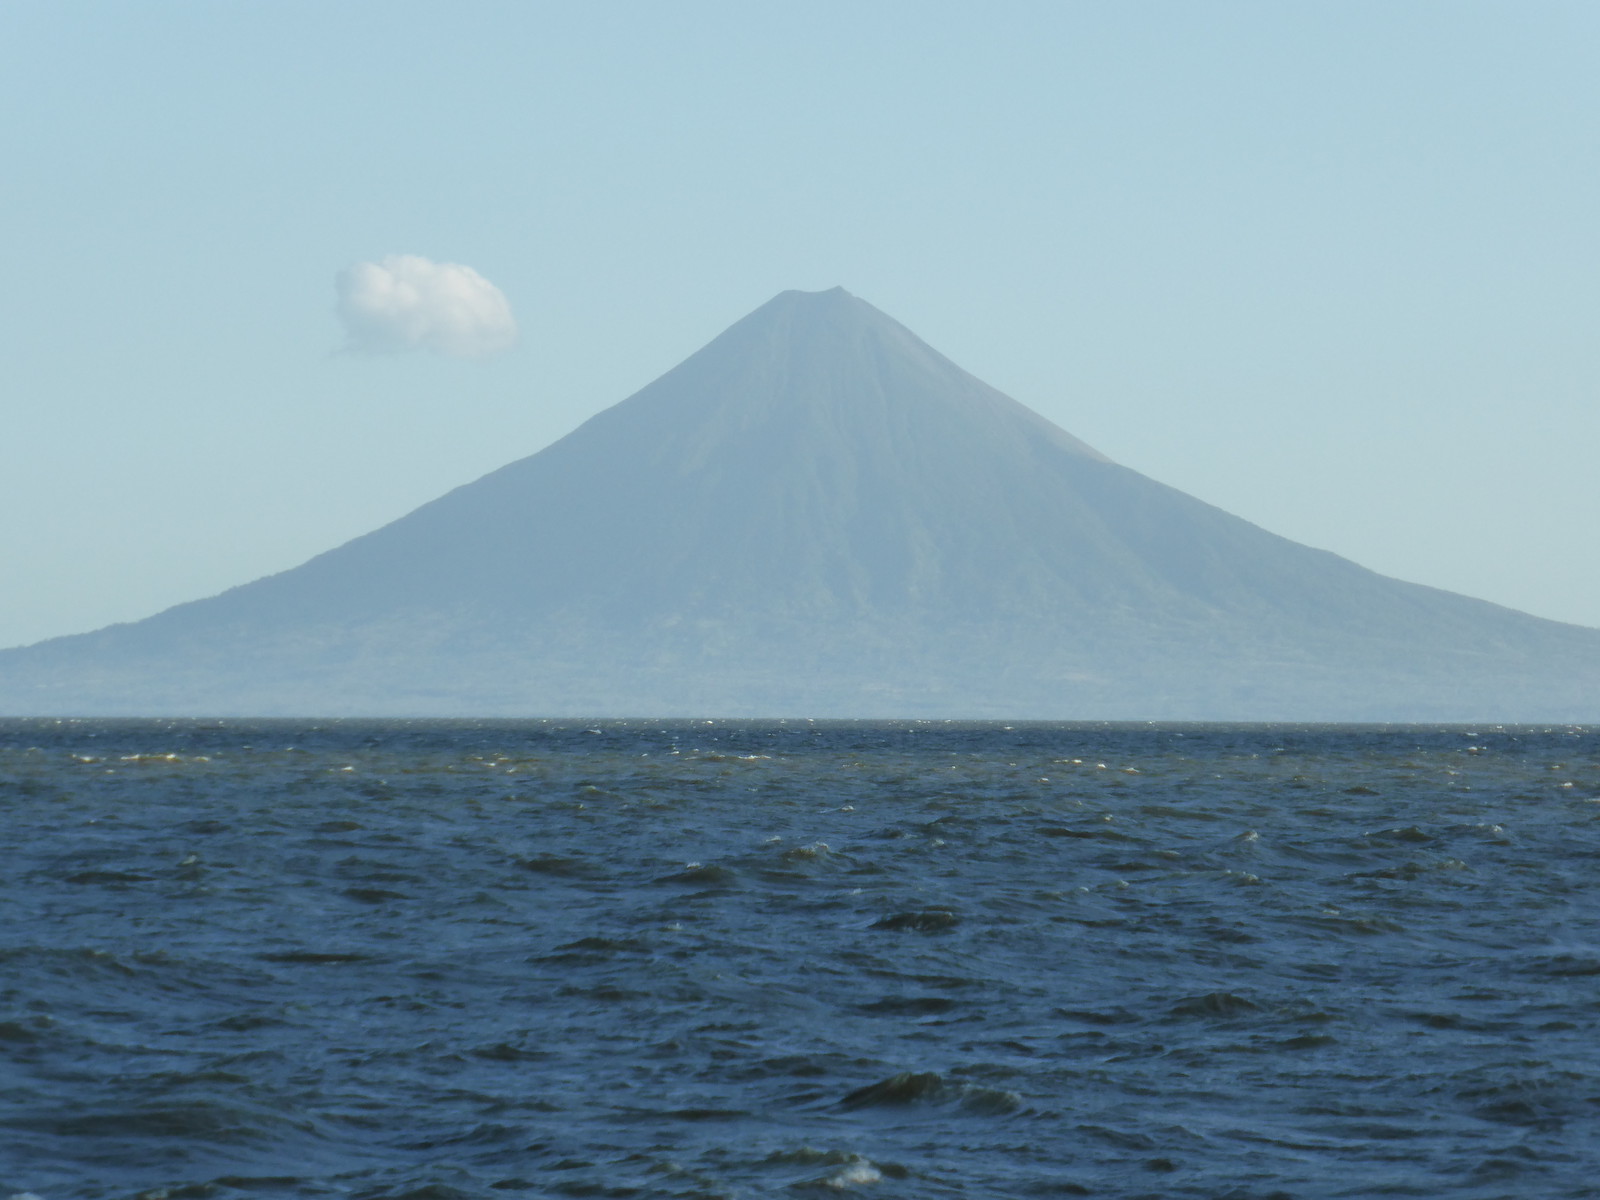 Volcán Concepción, the bigger of Ometepe's two volcanoes